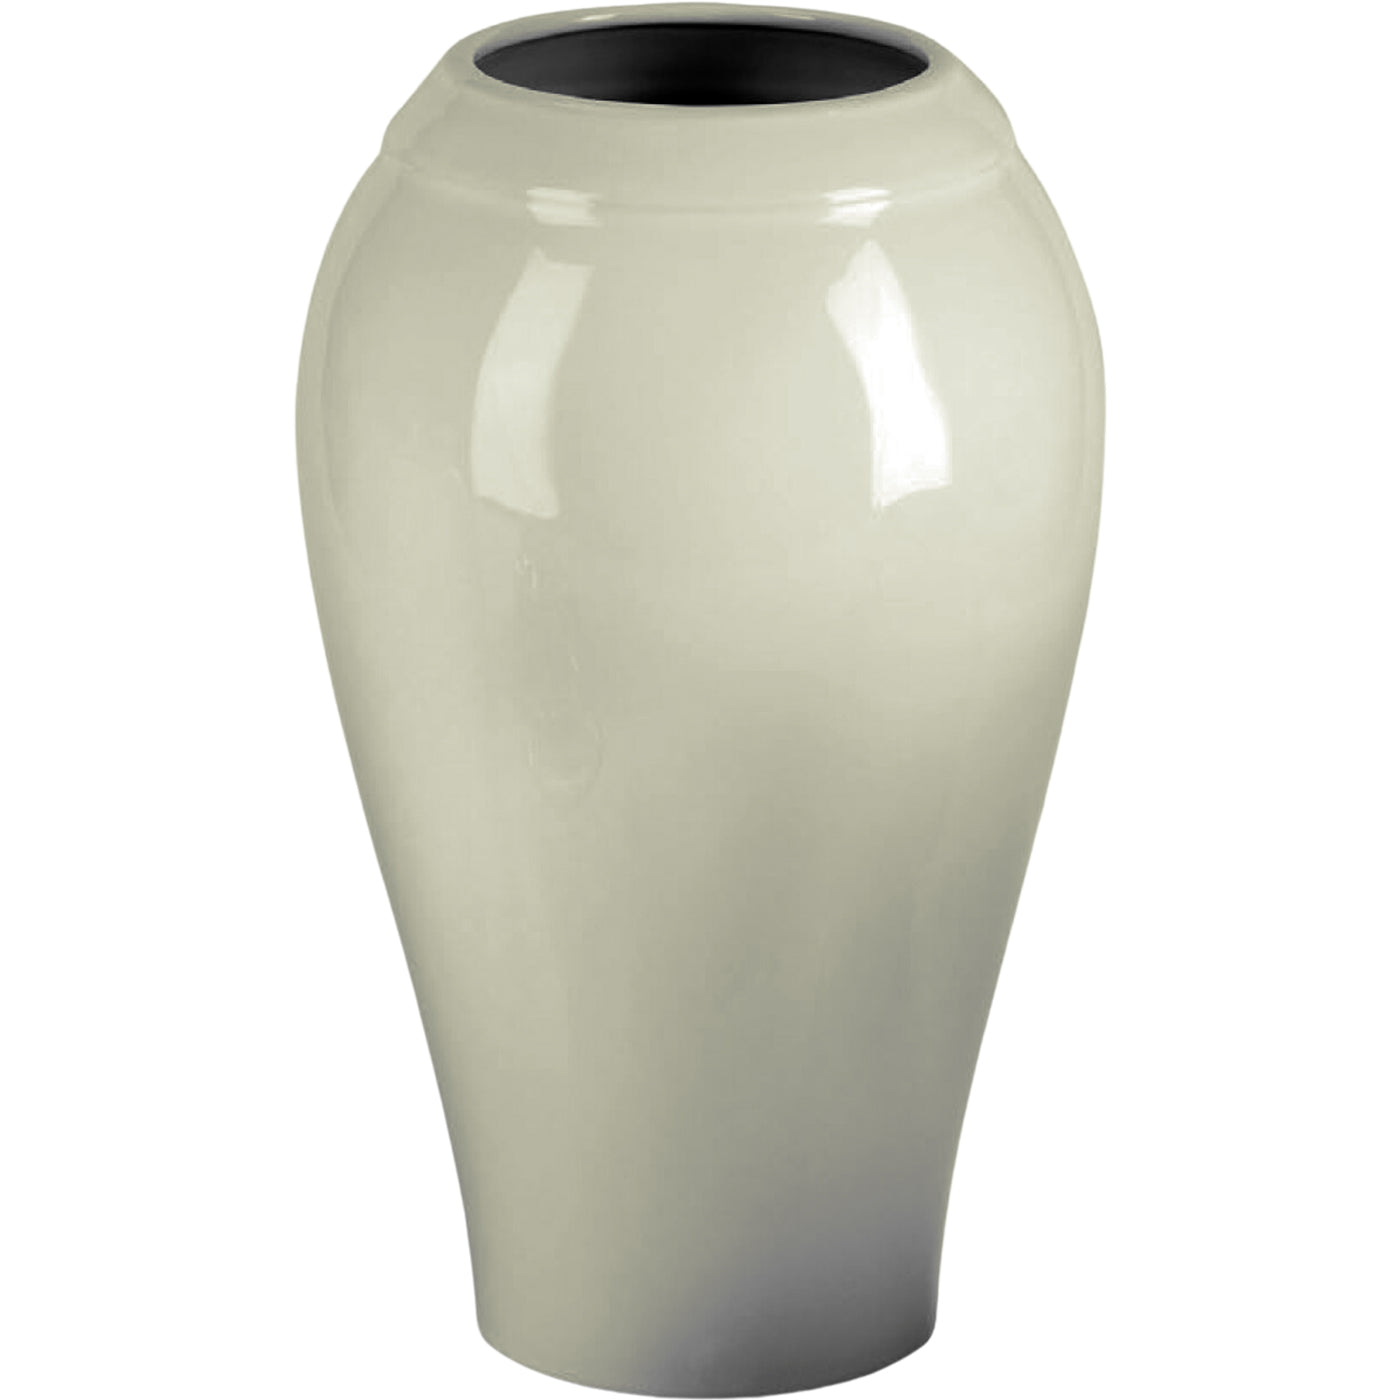 Grave vases Liscia ivory 21x13cm - 8.3x5.1in In ivory porcelain, ground attached LI144T/A